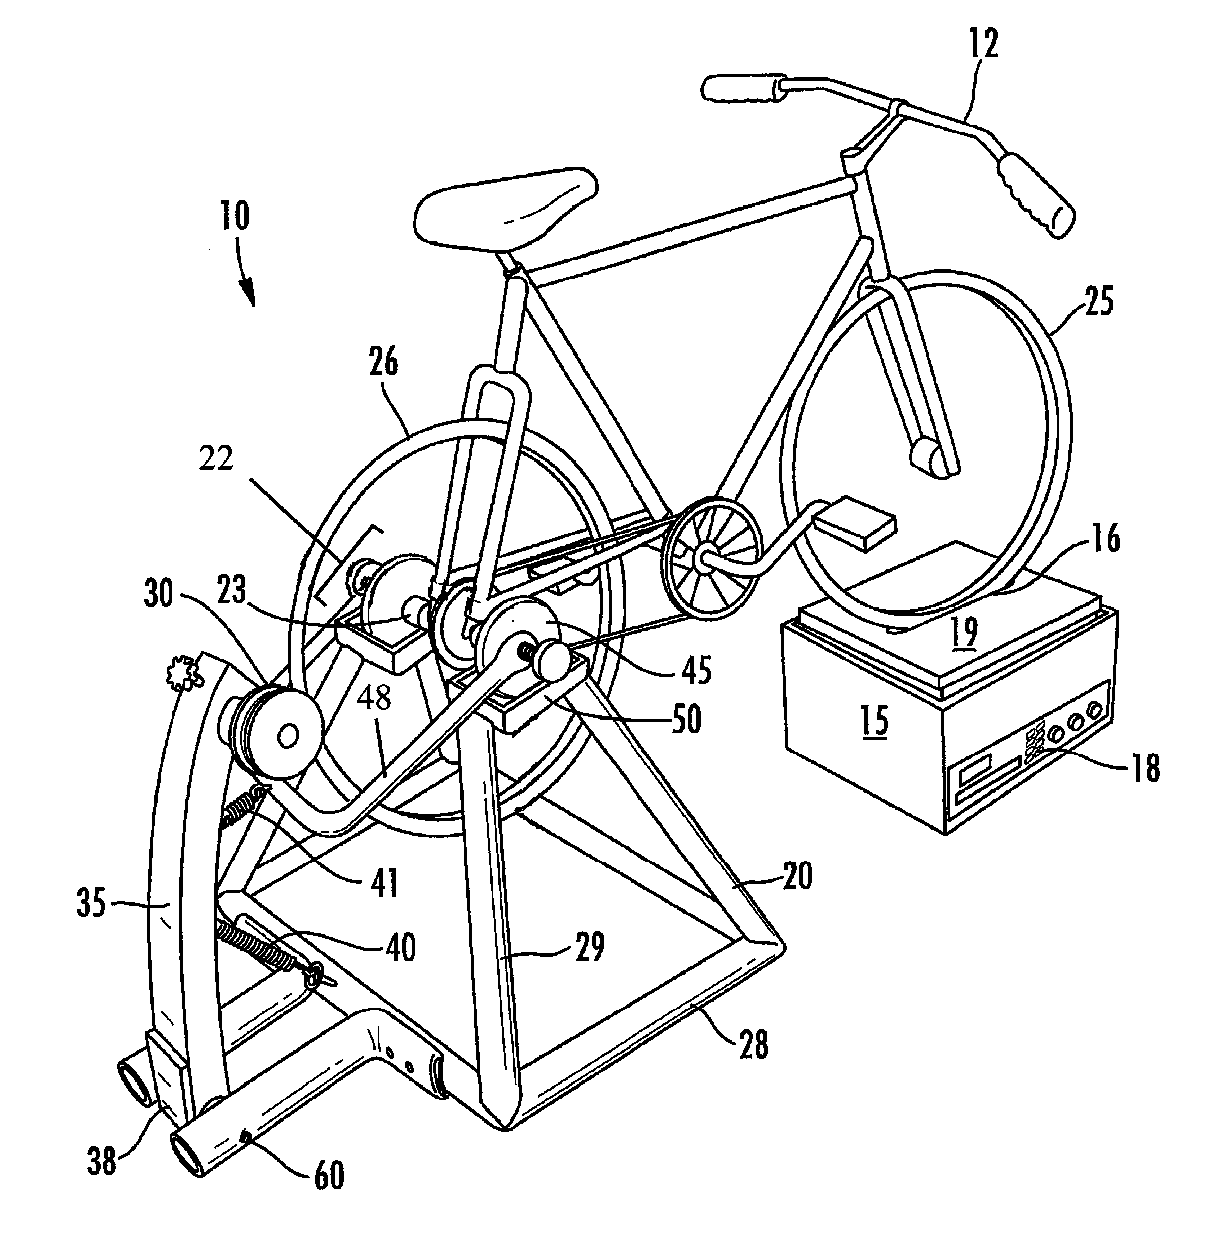 Bicycle trainer with variable resistance to pedaling